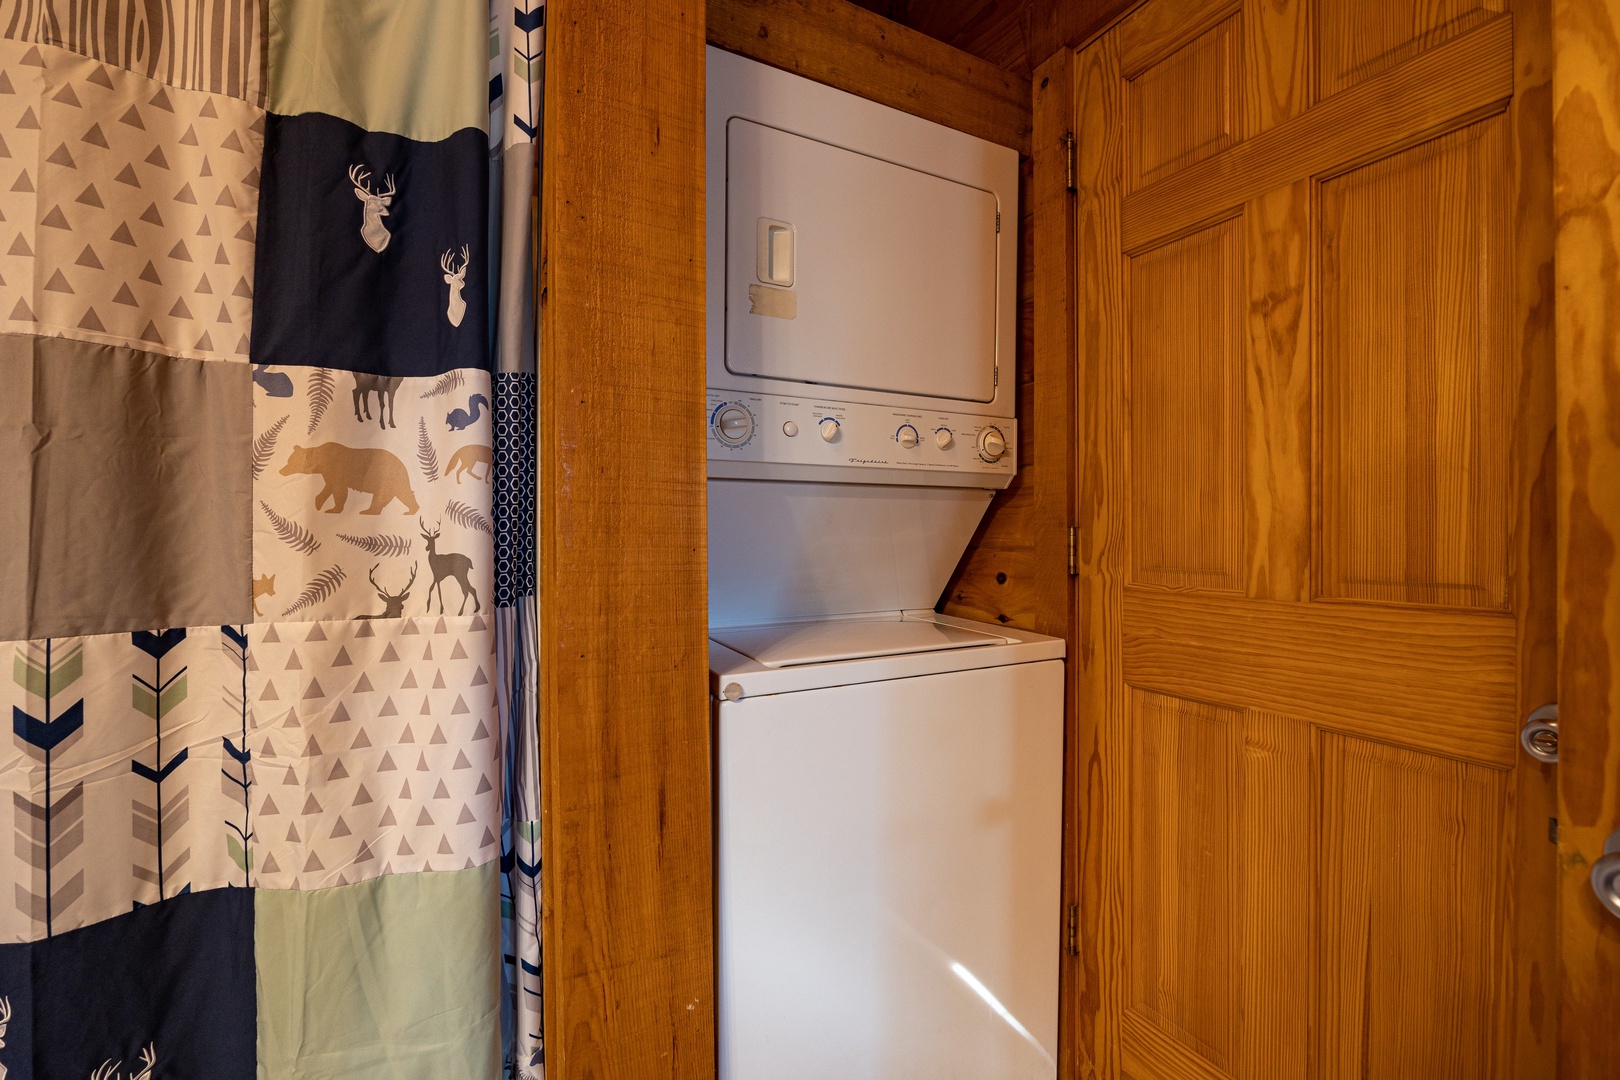 Washer and Dryer at Bear Feet Retreat, a 1 bedroom cabin rental located in pigeon forge